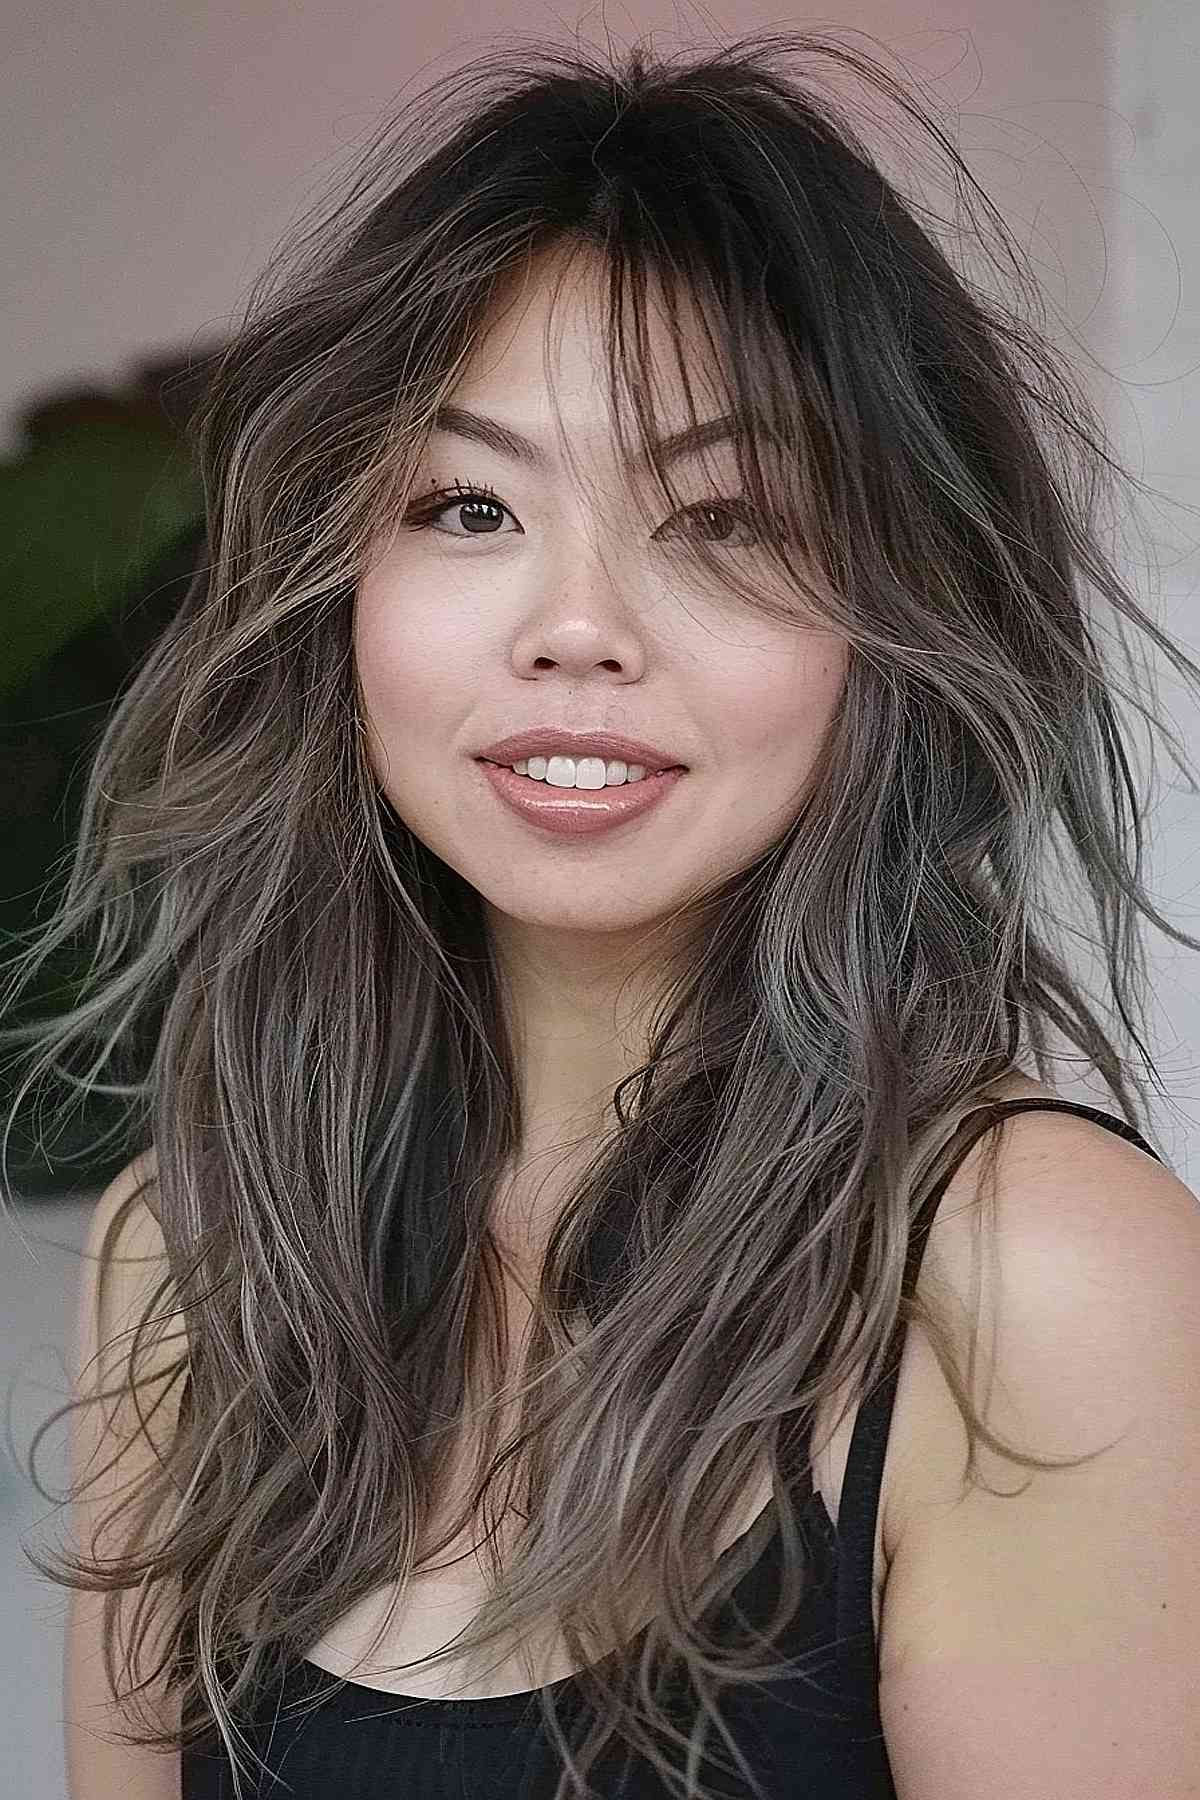 Medium-length wolf cut in mushroom brown with voluminous layers transitioning from dark roots to lighter tips, enhancing texture and movement.